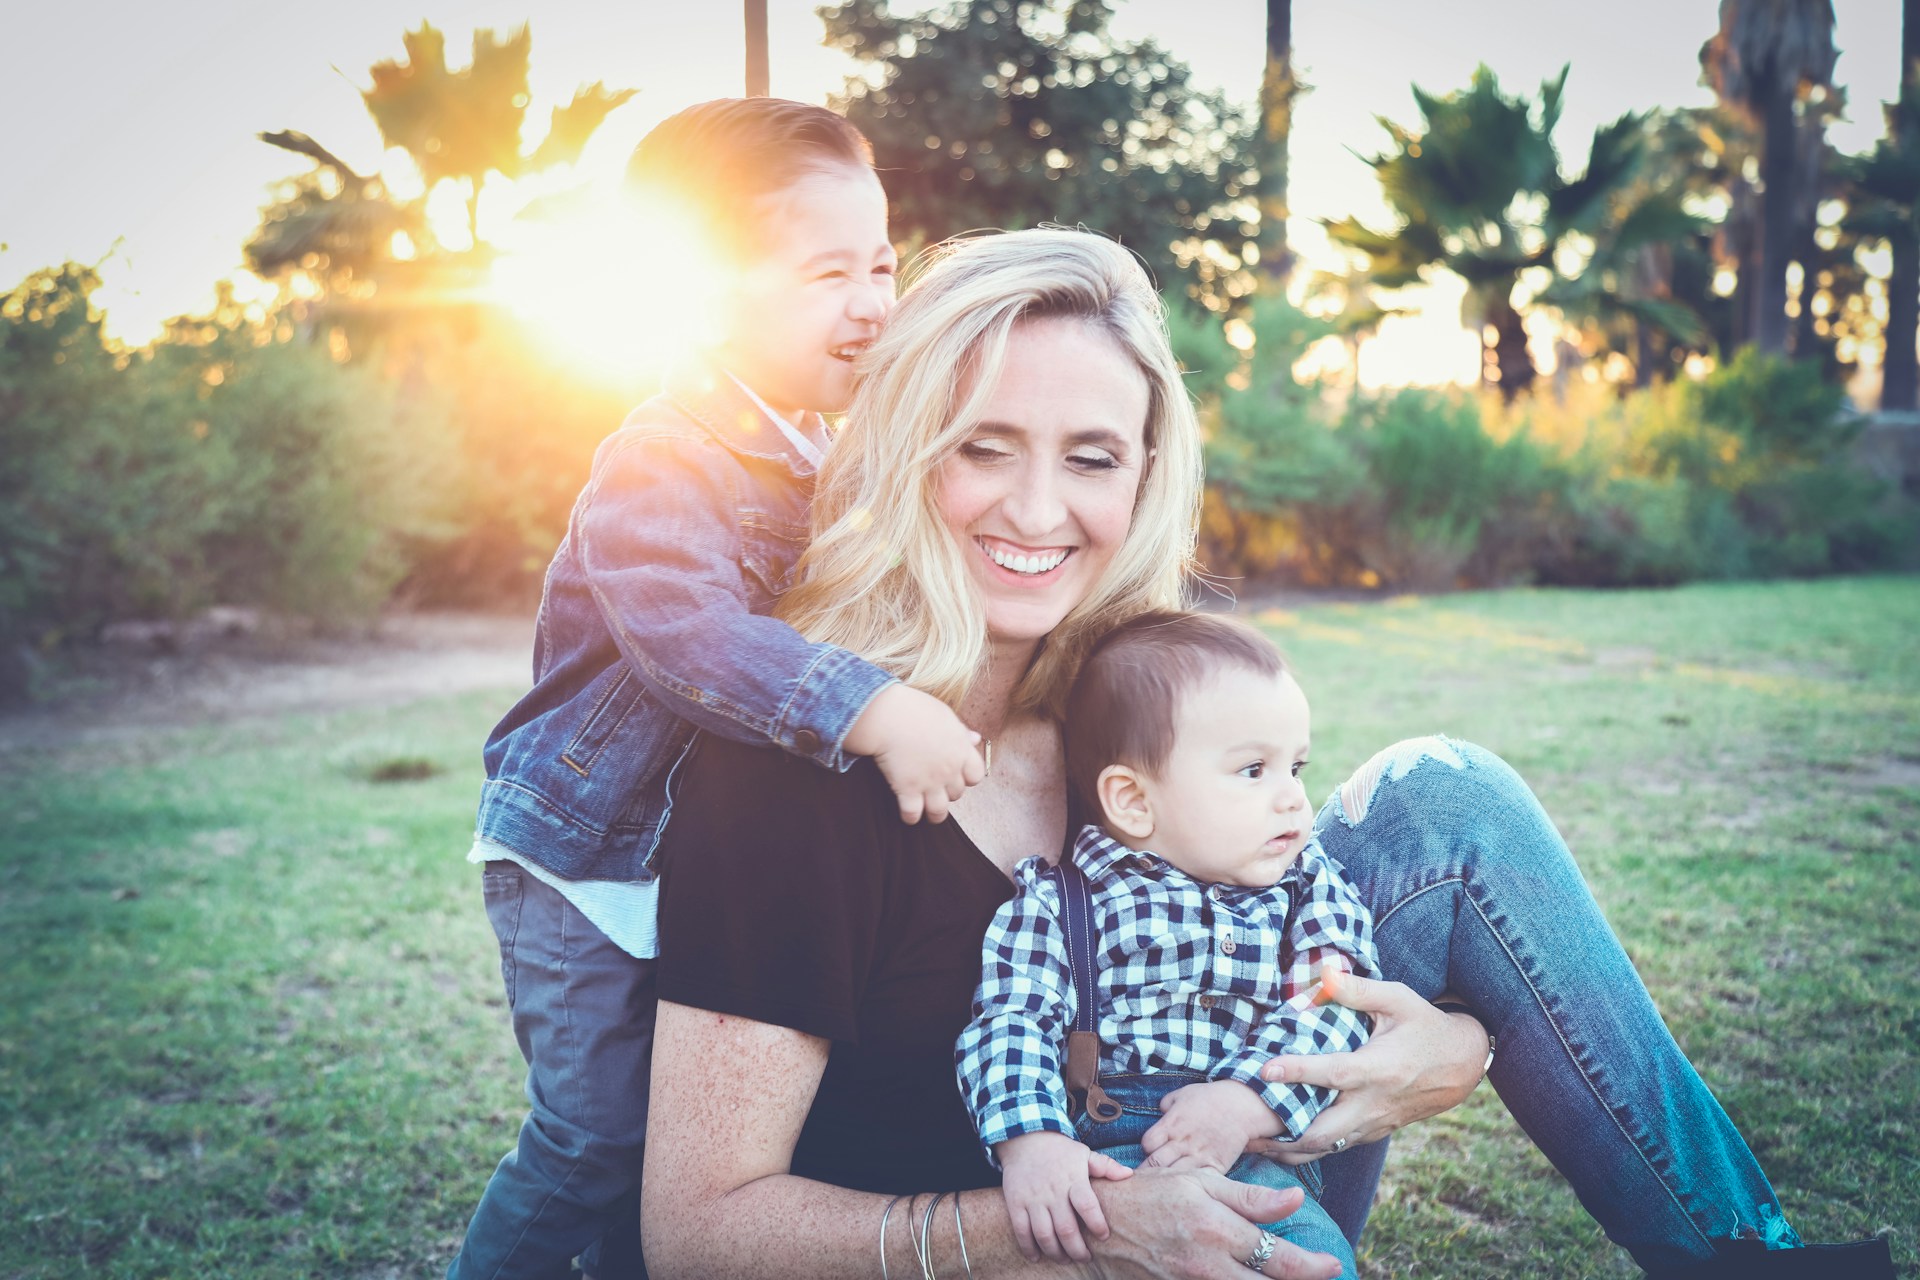 Being a single parent comes with a lot of freedom - after all, you don't need to consult with a partner first before making decisions or planning things. For some single parents, this can be incredibly empowering. It can help you grow as a person and become more confident in yourself.